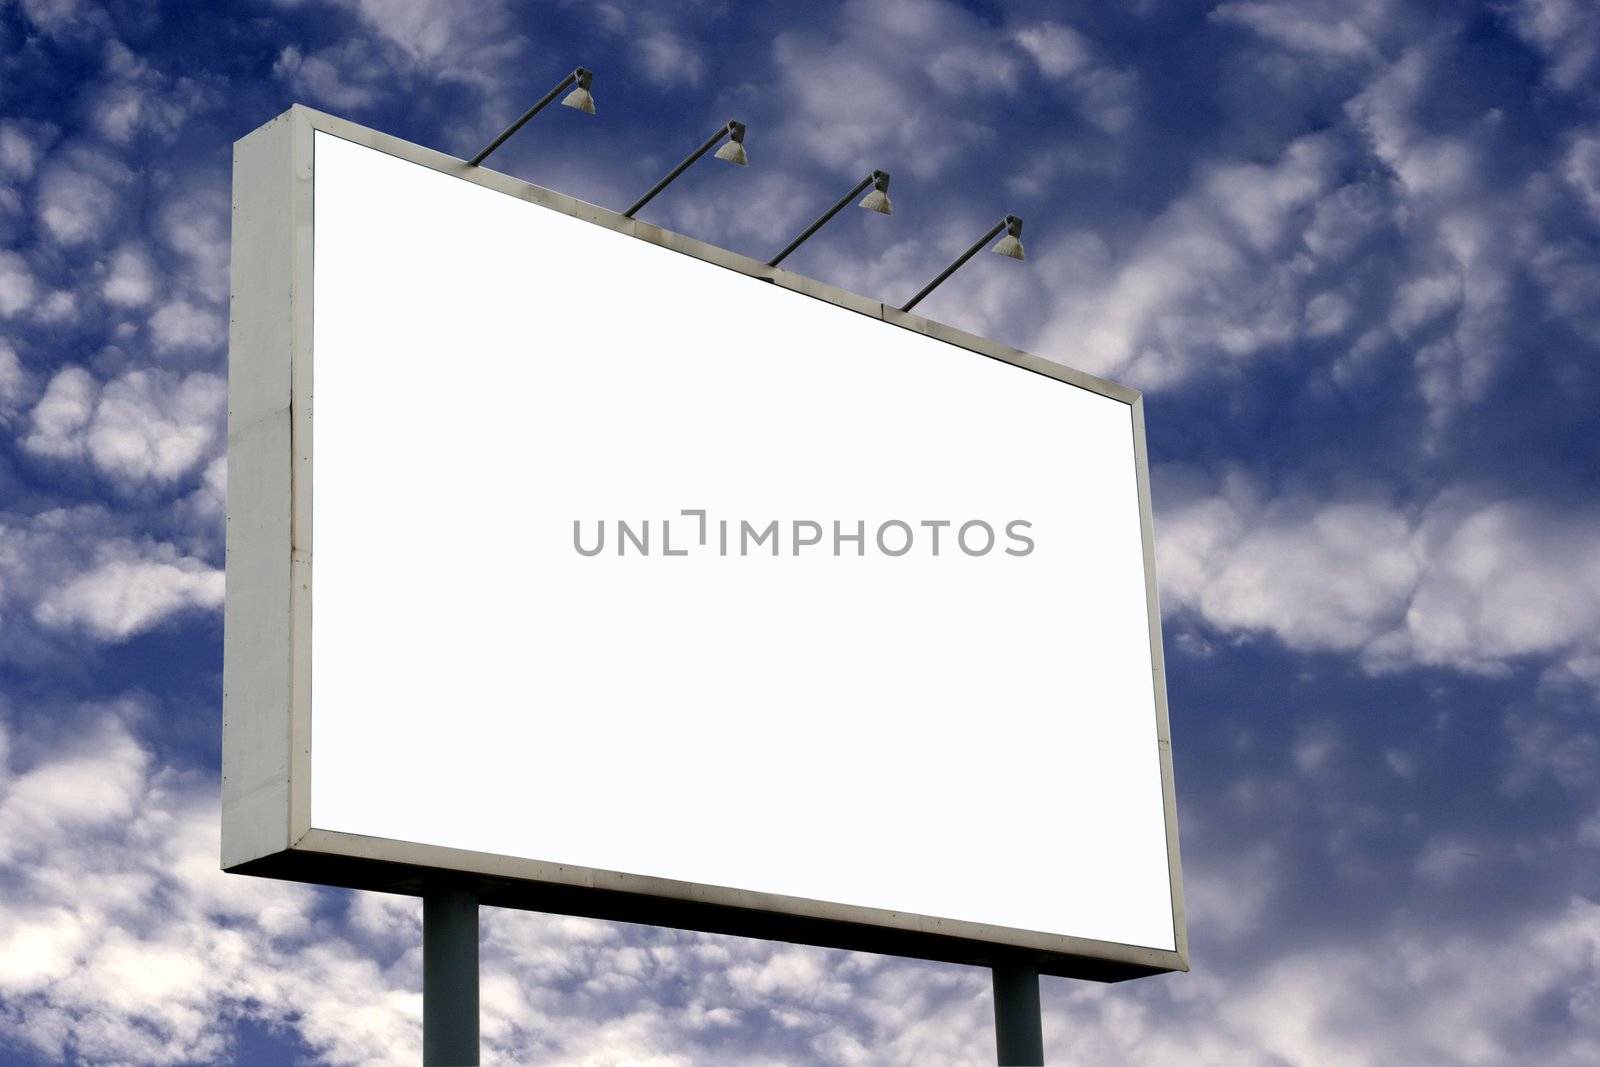 Blank Billboard and Pluffy Clouds - ready for commercial advertisement